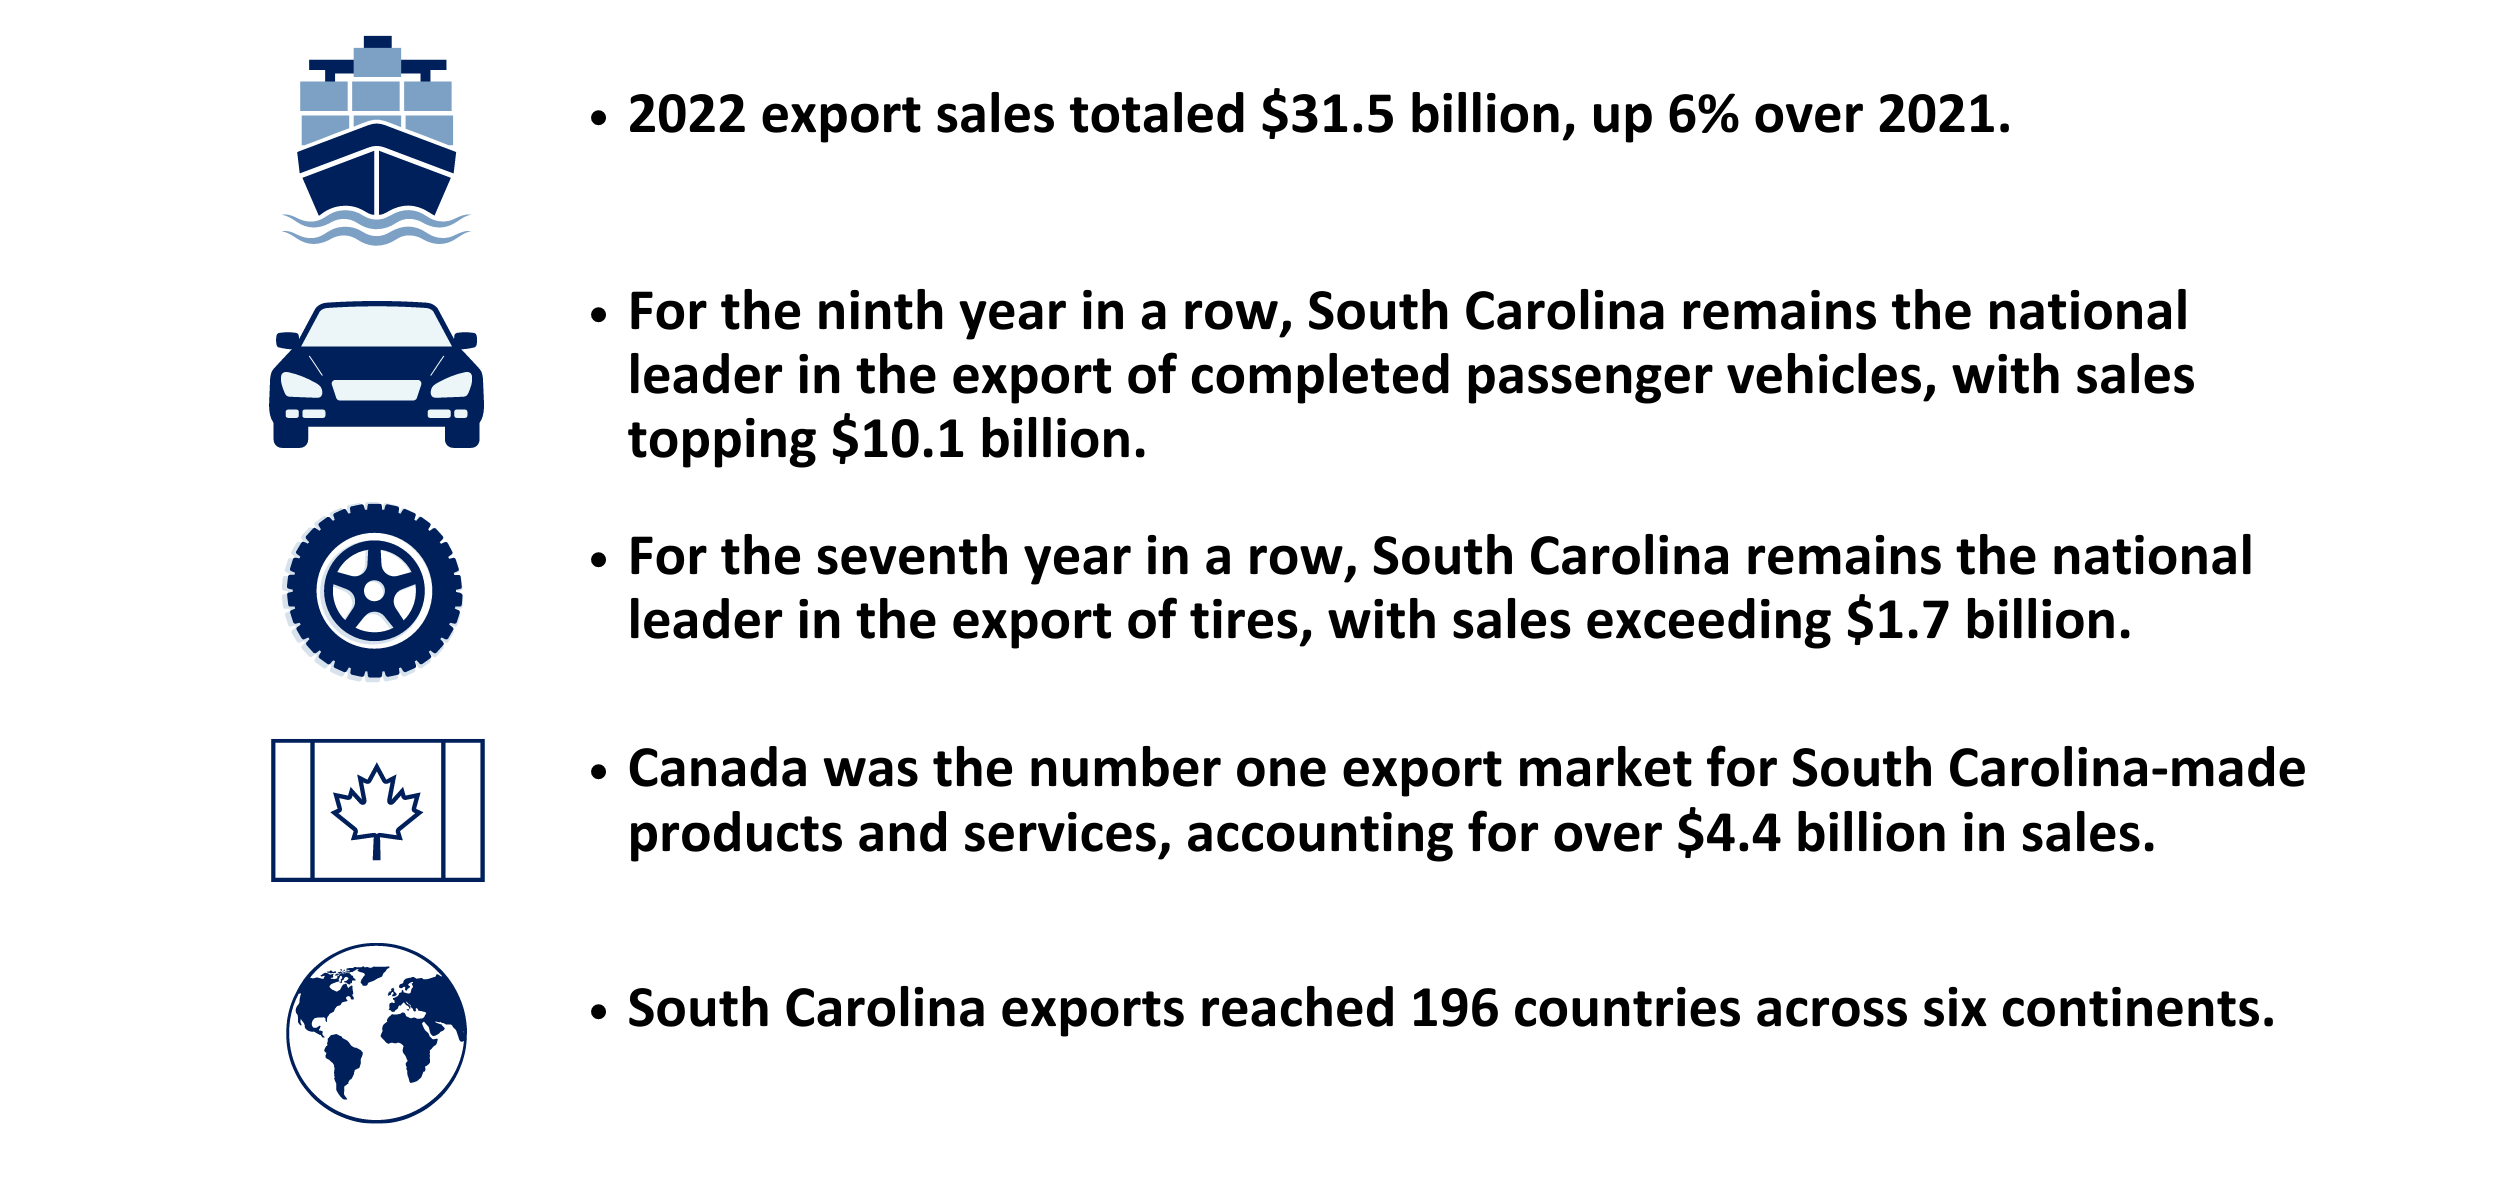 Five notable 2022 trade stats in bulleted form on the right, with corresponding icons on the left. From top to bottom: "•2022 export sales totaled $31.5 billion, up 6% over 2021." "•For the ninth year in a row, South Carolina remains the national leader in the export of completed passenger vehicles, with sales topping $10.1 billion." "•For the seventh year in a row, South Carolina remains the national leader in the export of tires, with sales exceeding $1.7 billion." "•Canada was the number one export market for South Carolina-made products and services, accounting for over $4.4 billion in sales." "•South Carolina exports reached 196 countries across six continents."